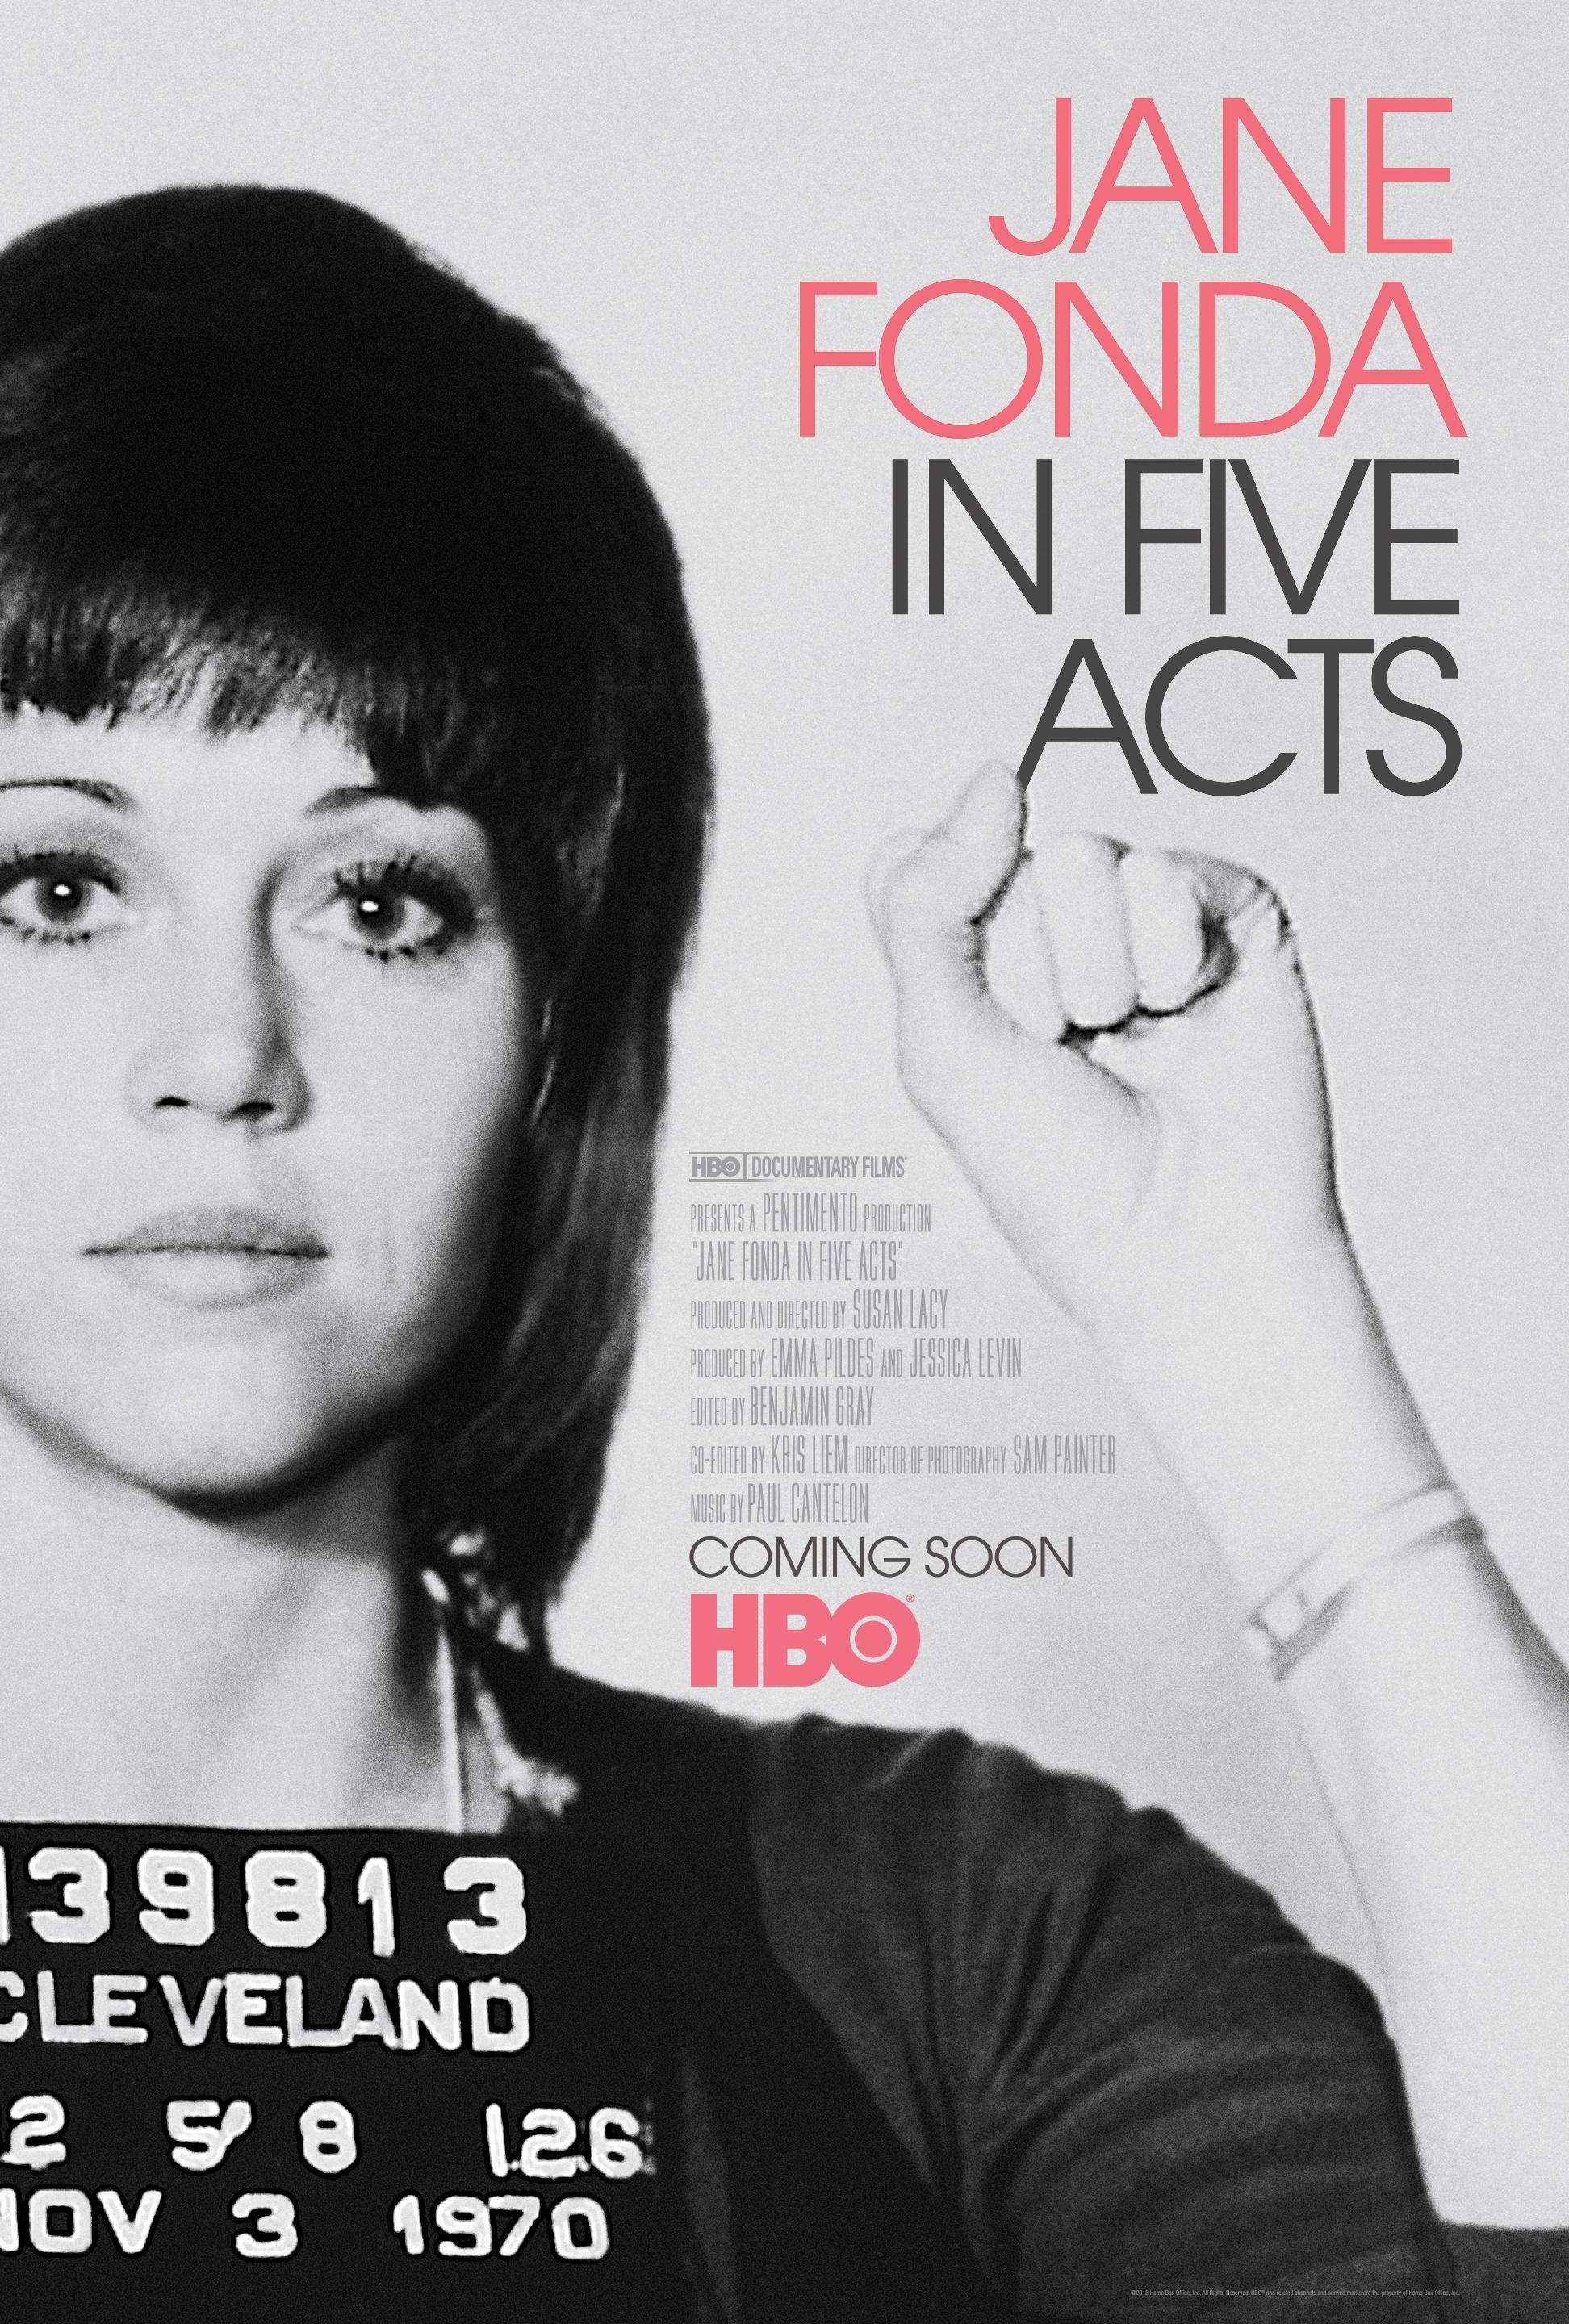 Mega Sized TV Poster Image for Jane Fonda in Five Acts 